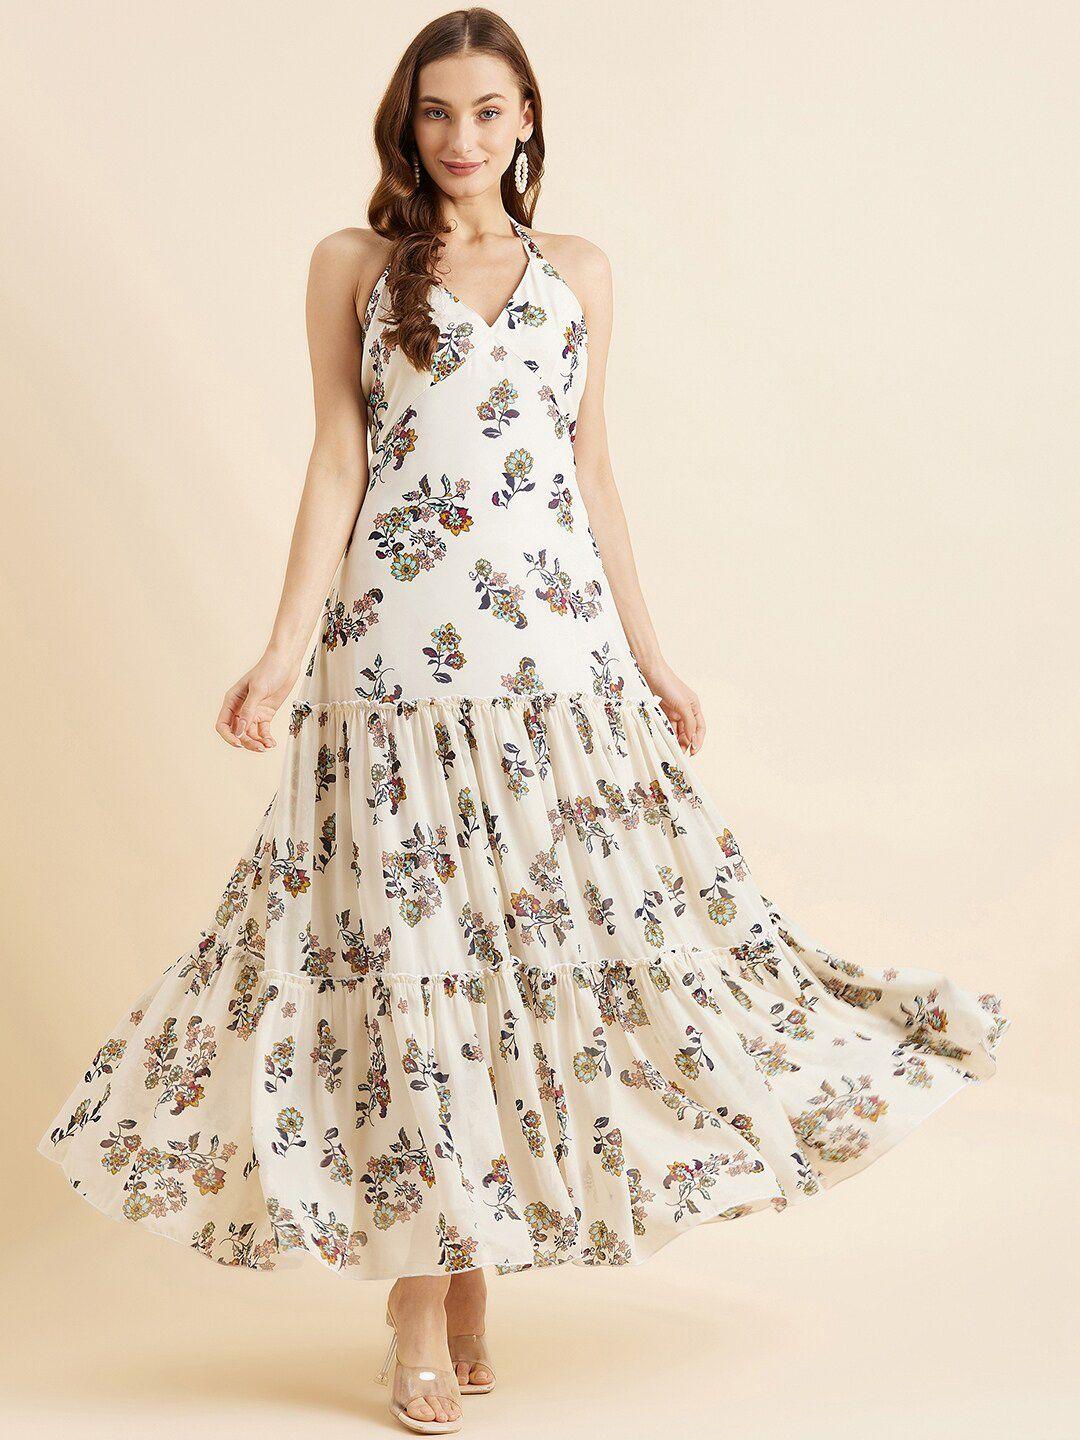 panit white floral printed georgette maxi dress